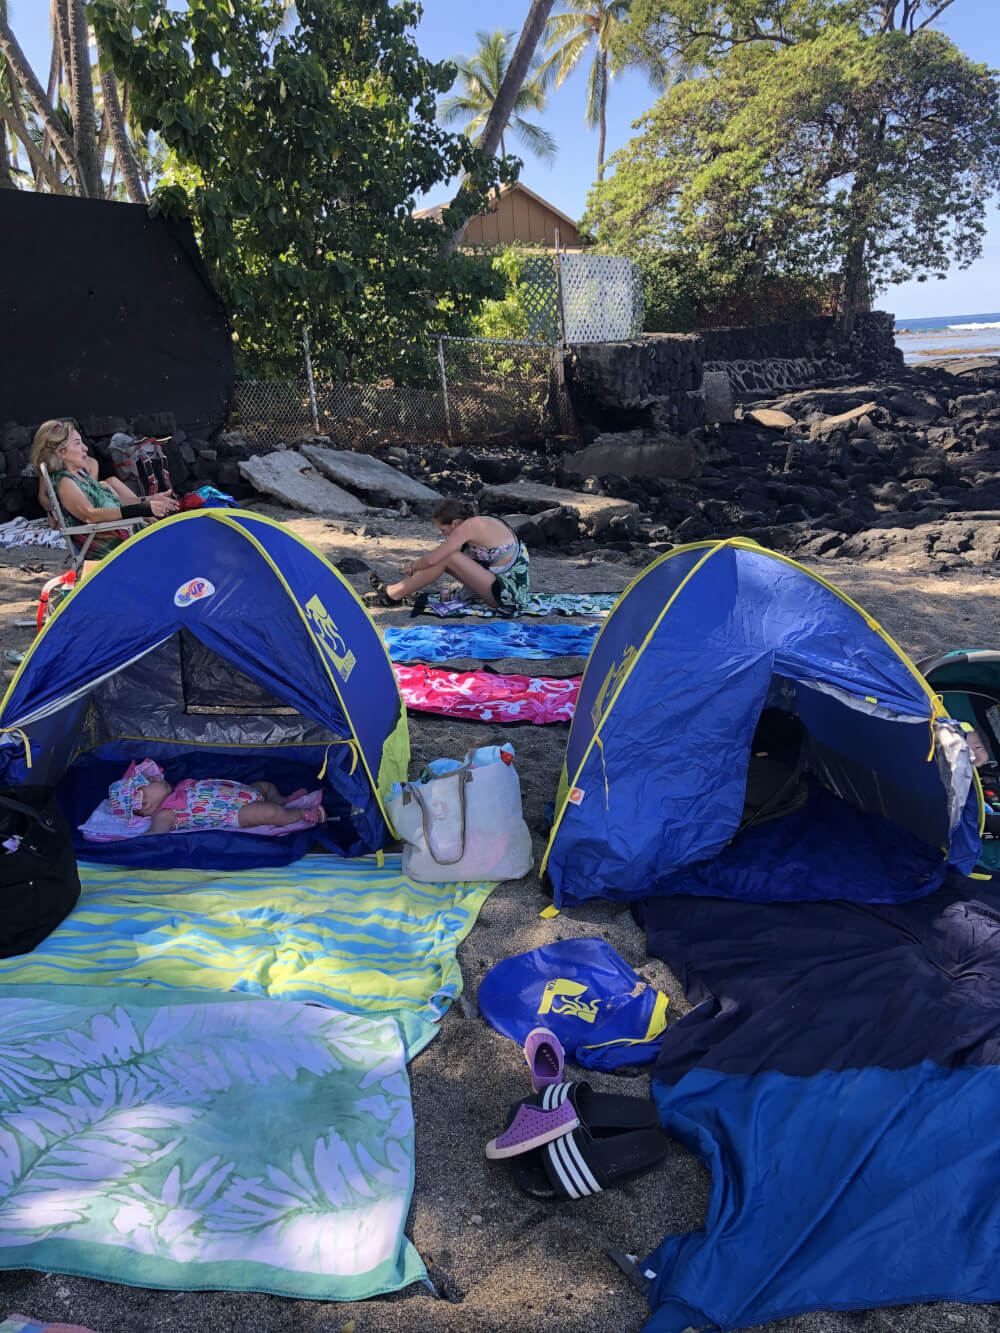 Everything you Need to Know About Traveling to Hawaii Big Island with Kids featured by top Hawaii travel blog, Hawaii Travel with Kids | Protecting newborns from the sunlight is very important. These baby beach tents gave lots of shade.